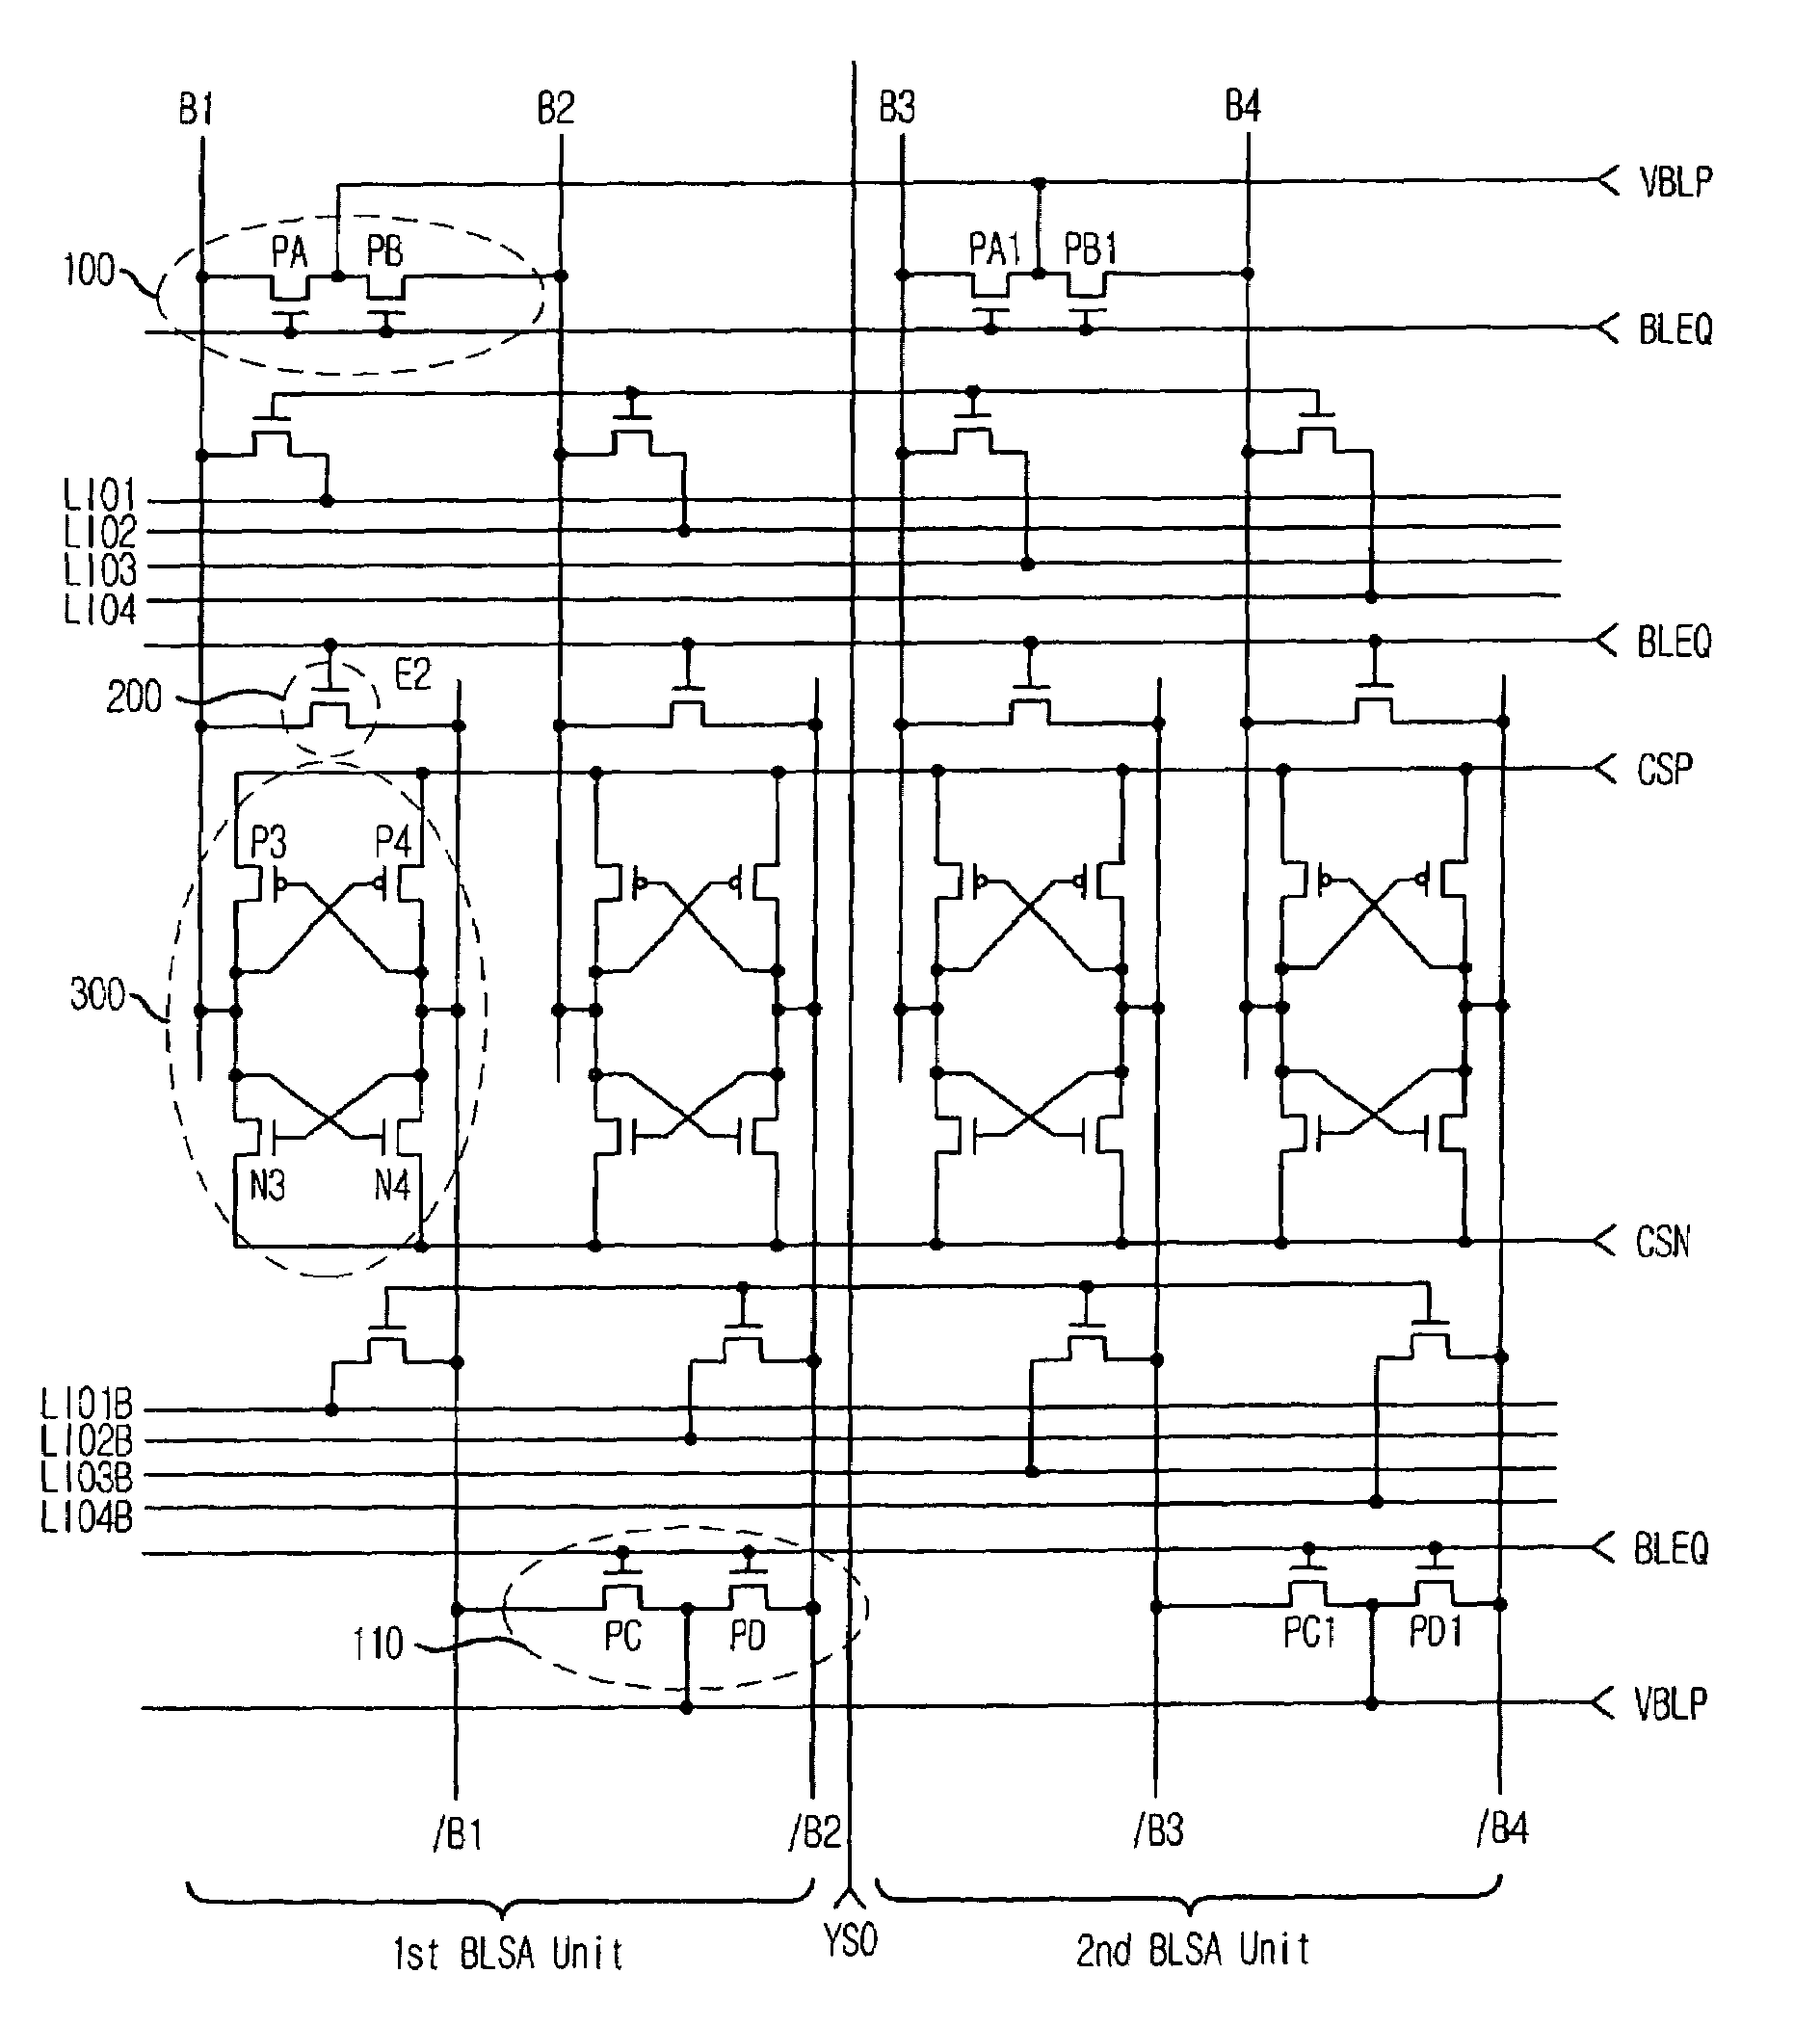 High integrated open bit line structure semiconductor memory device with precharge units to reduce interference or noise